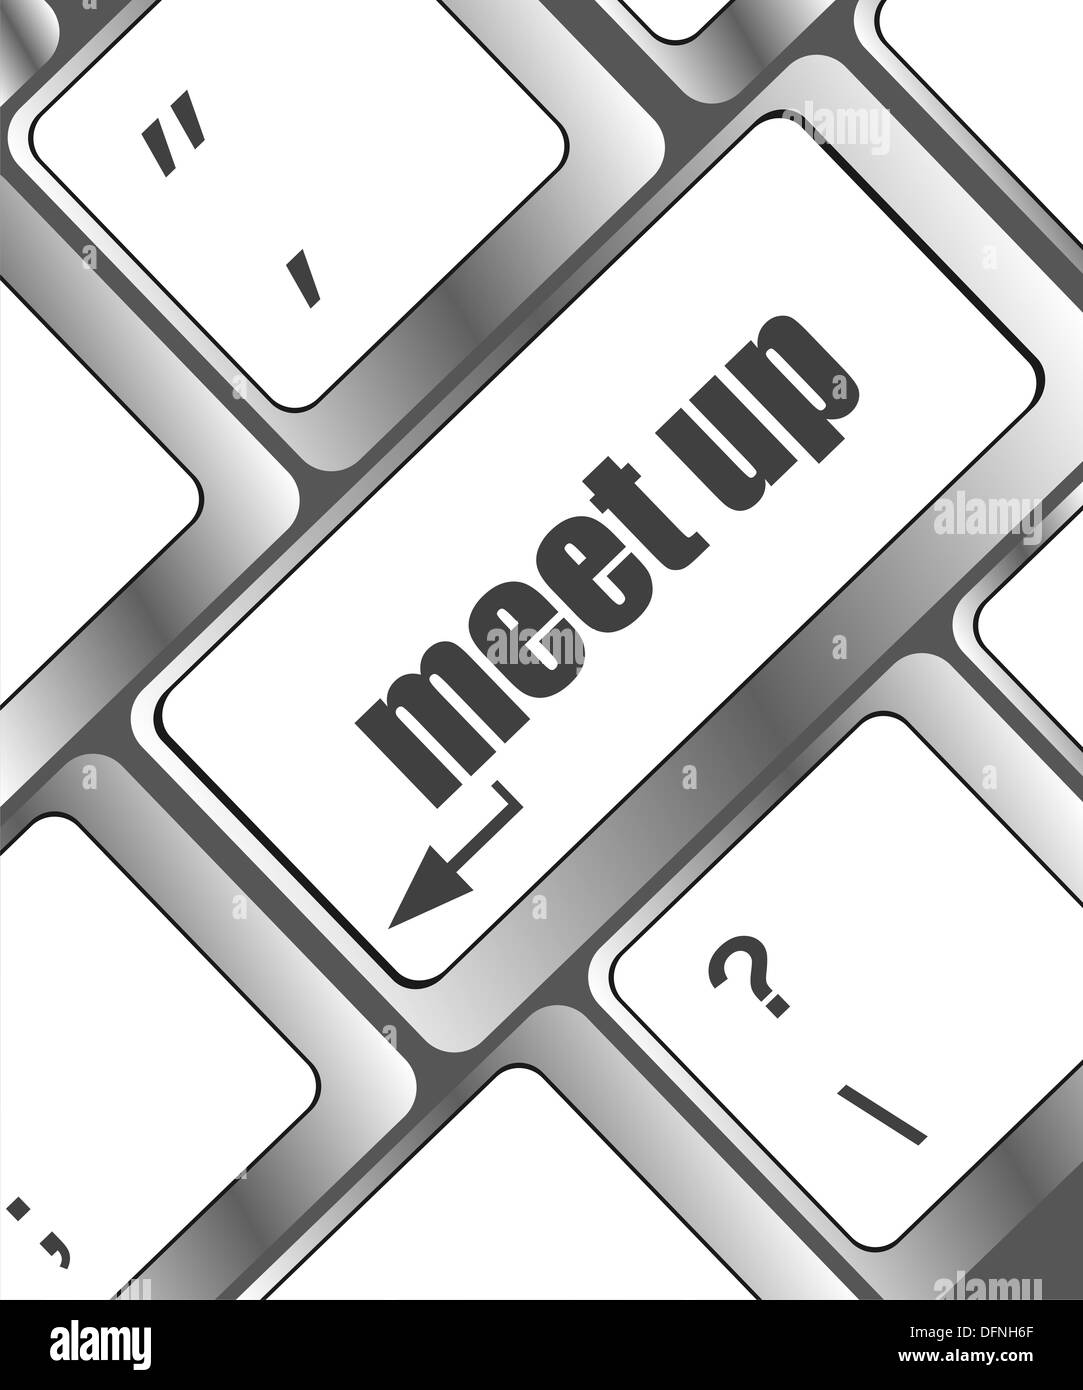 Meeting (meet up) sign button on keyboard Stock Photo